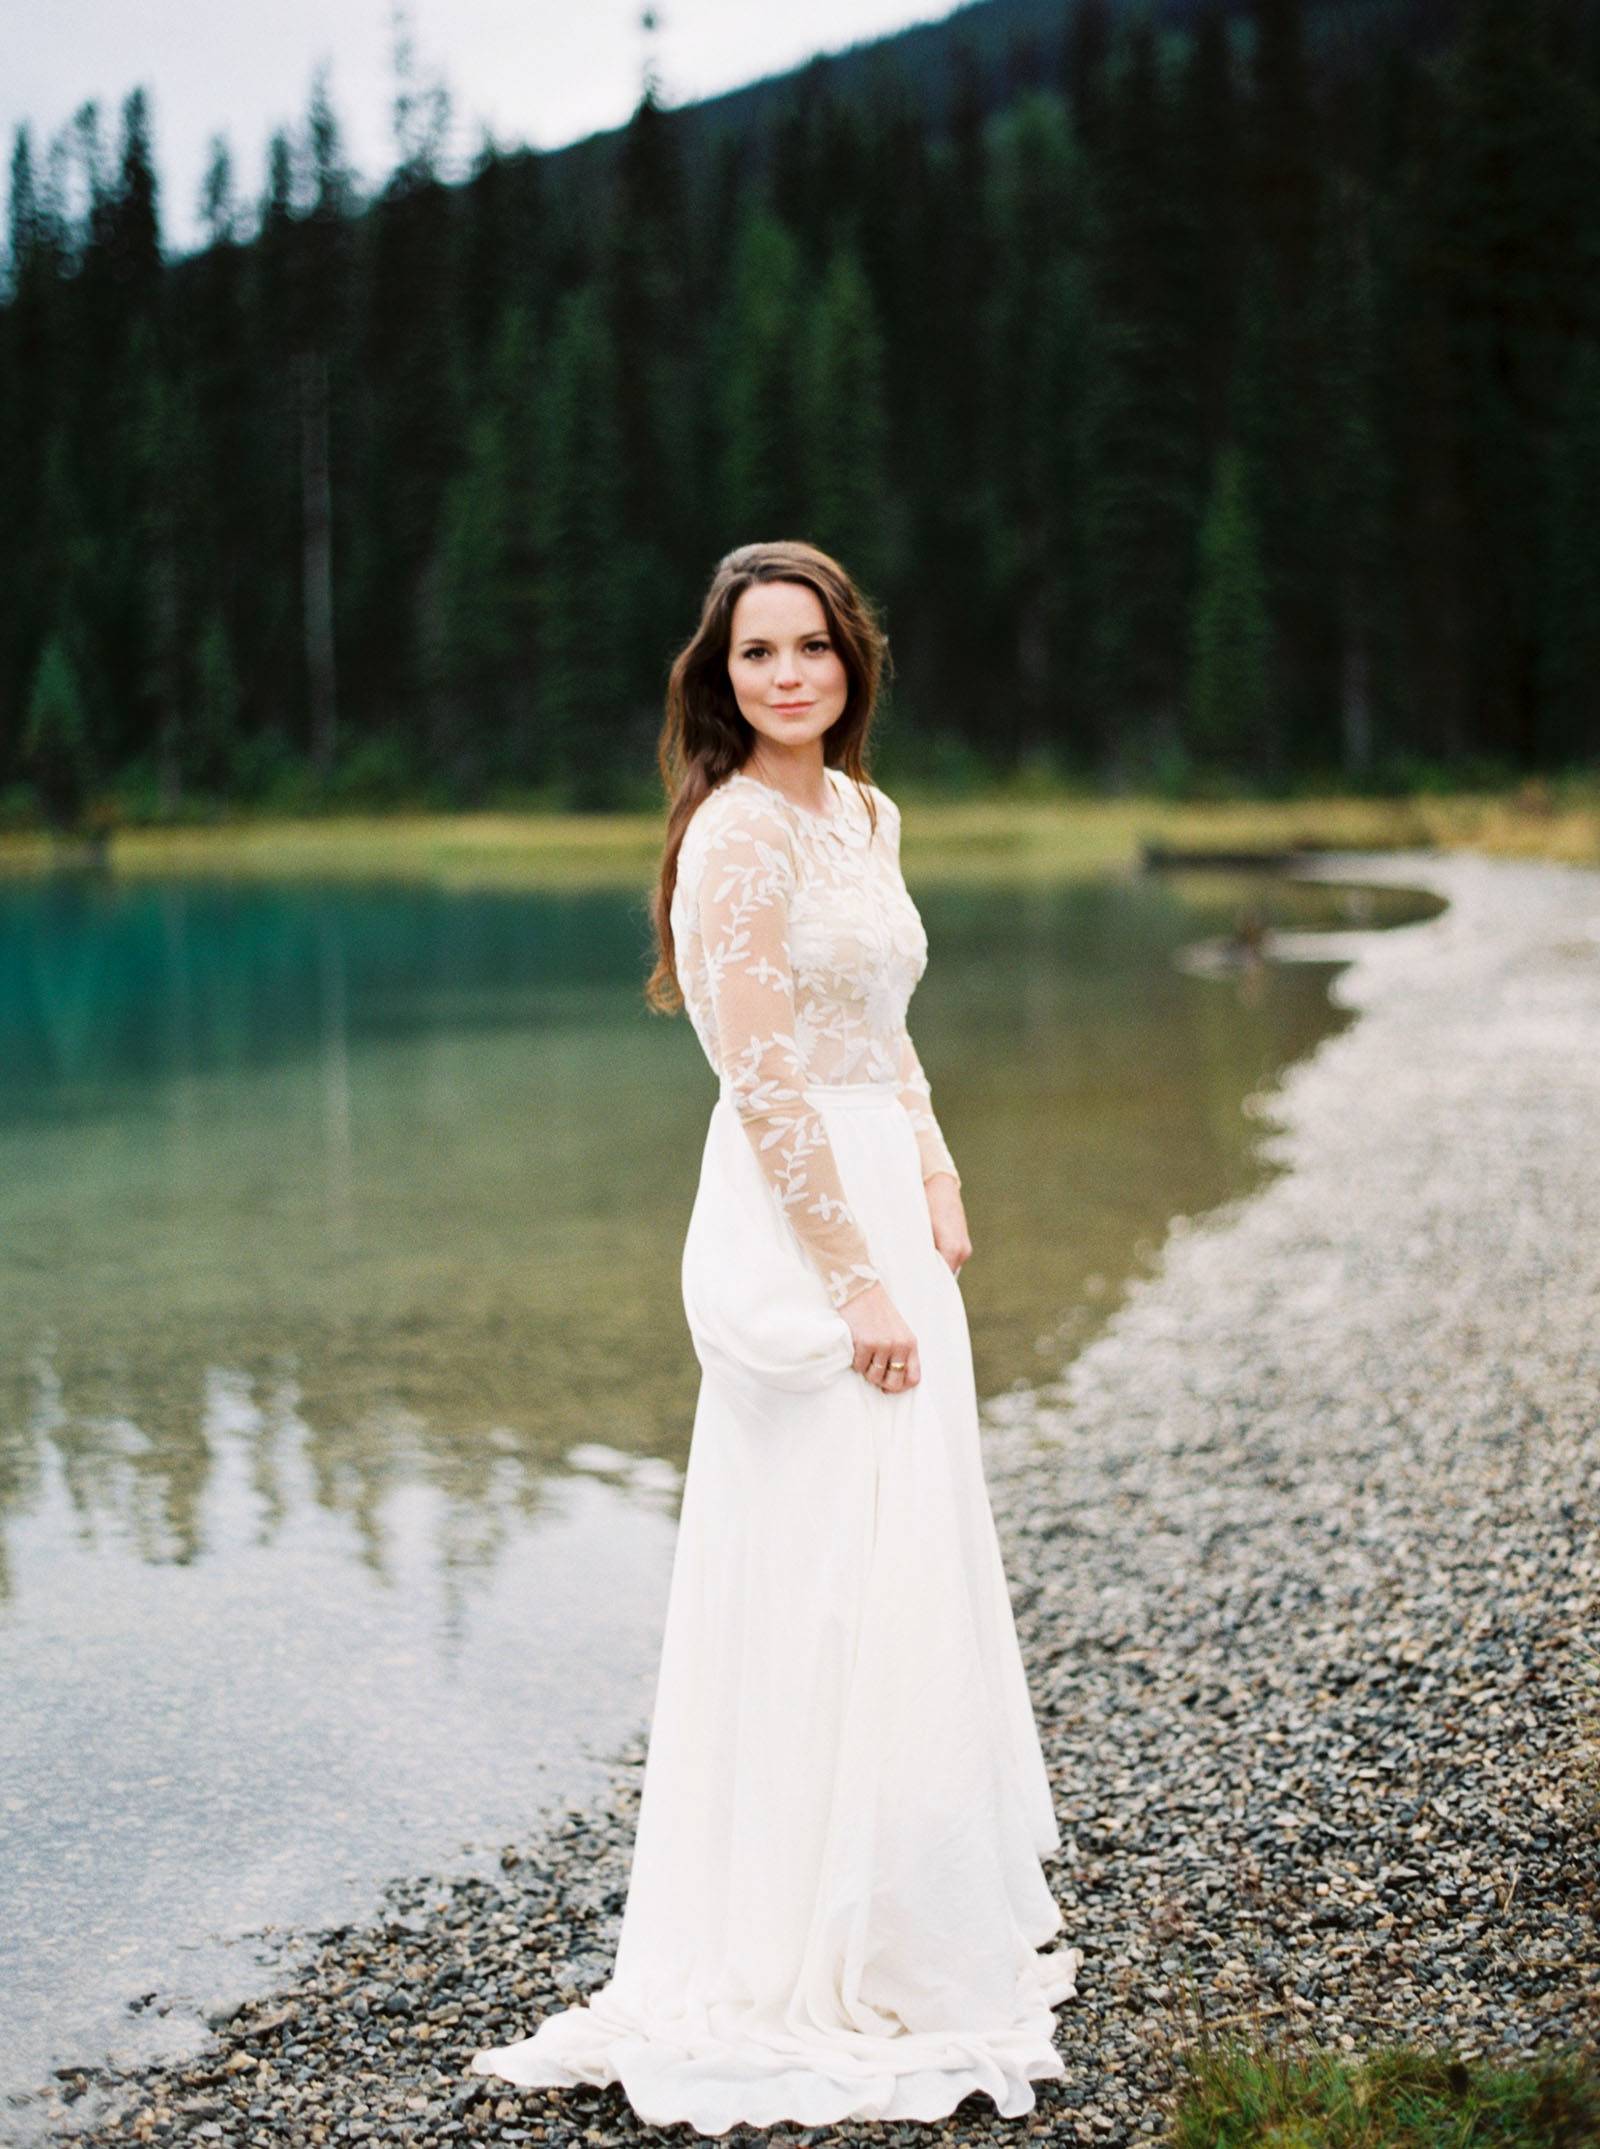 Intimate wedding in the Canadian Rockies inspired by nature | Banff ...